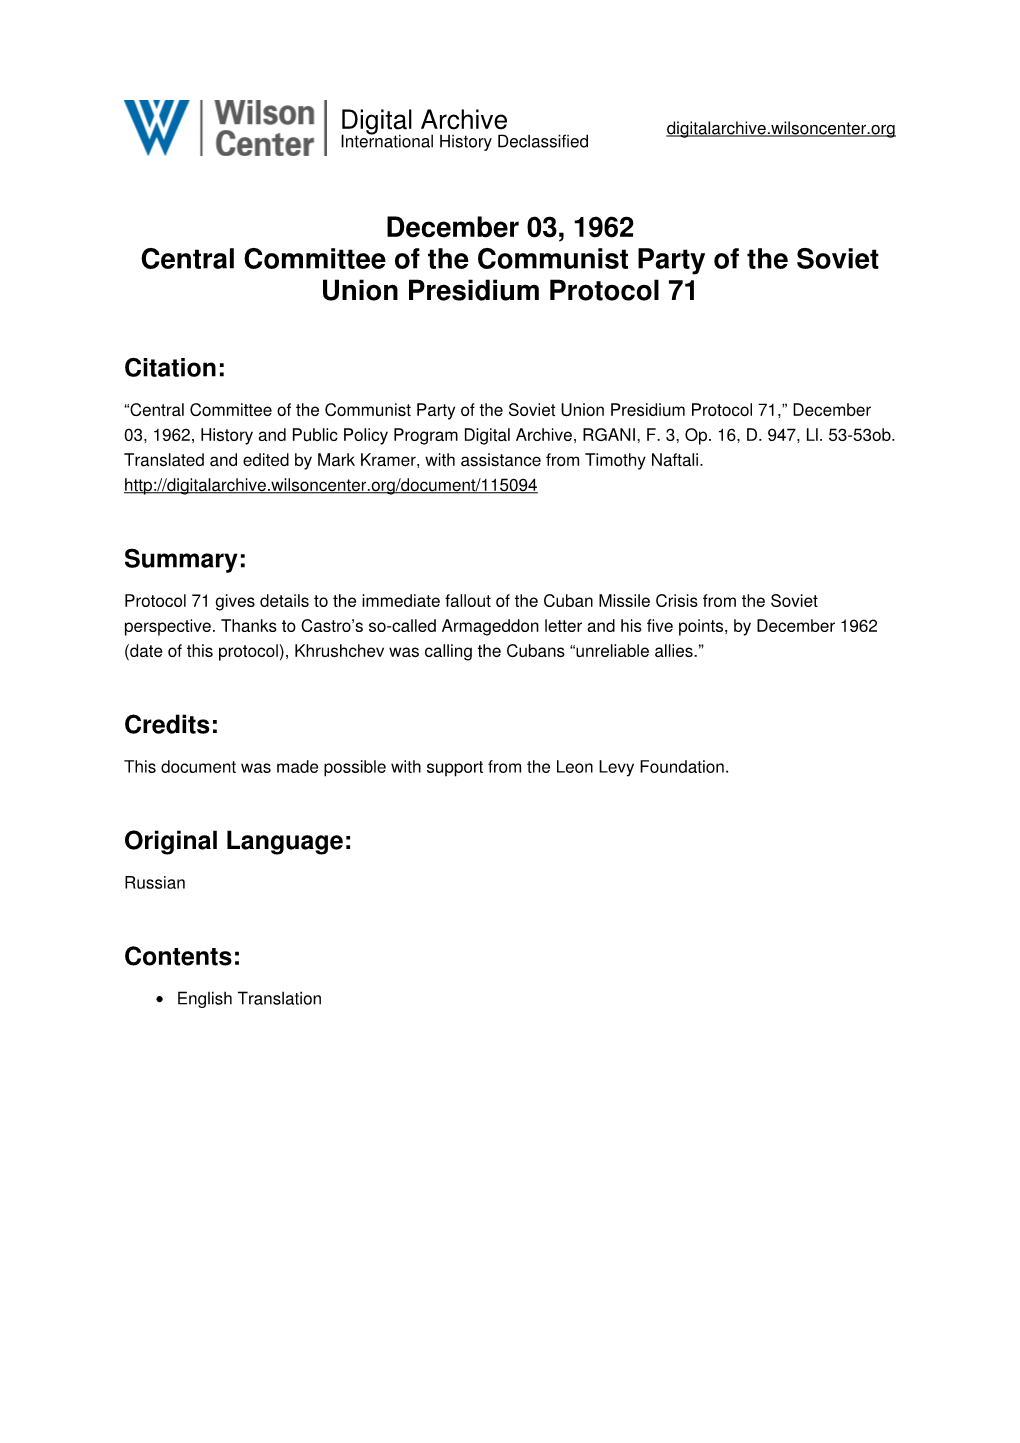 December 03, 1962 Central Committee of the Communist Party of the Soviet Union Presidium Protocol 71